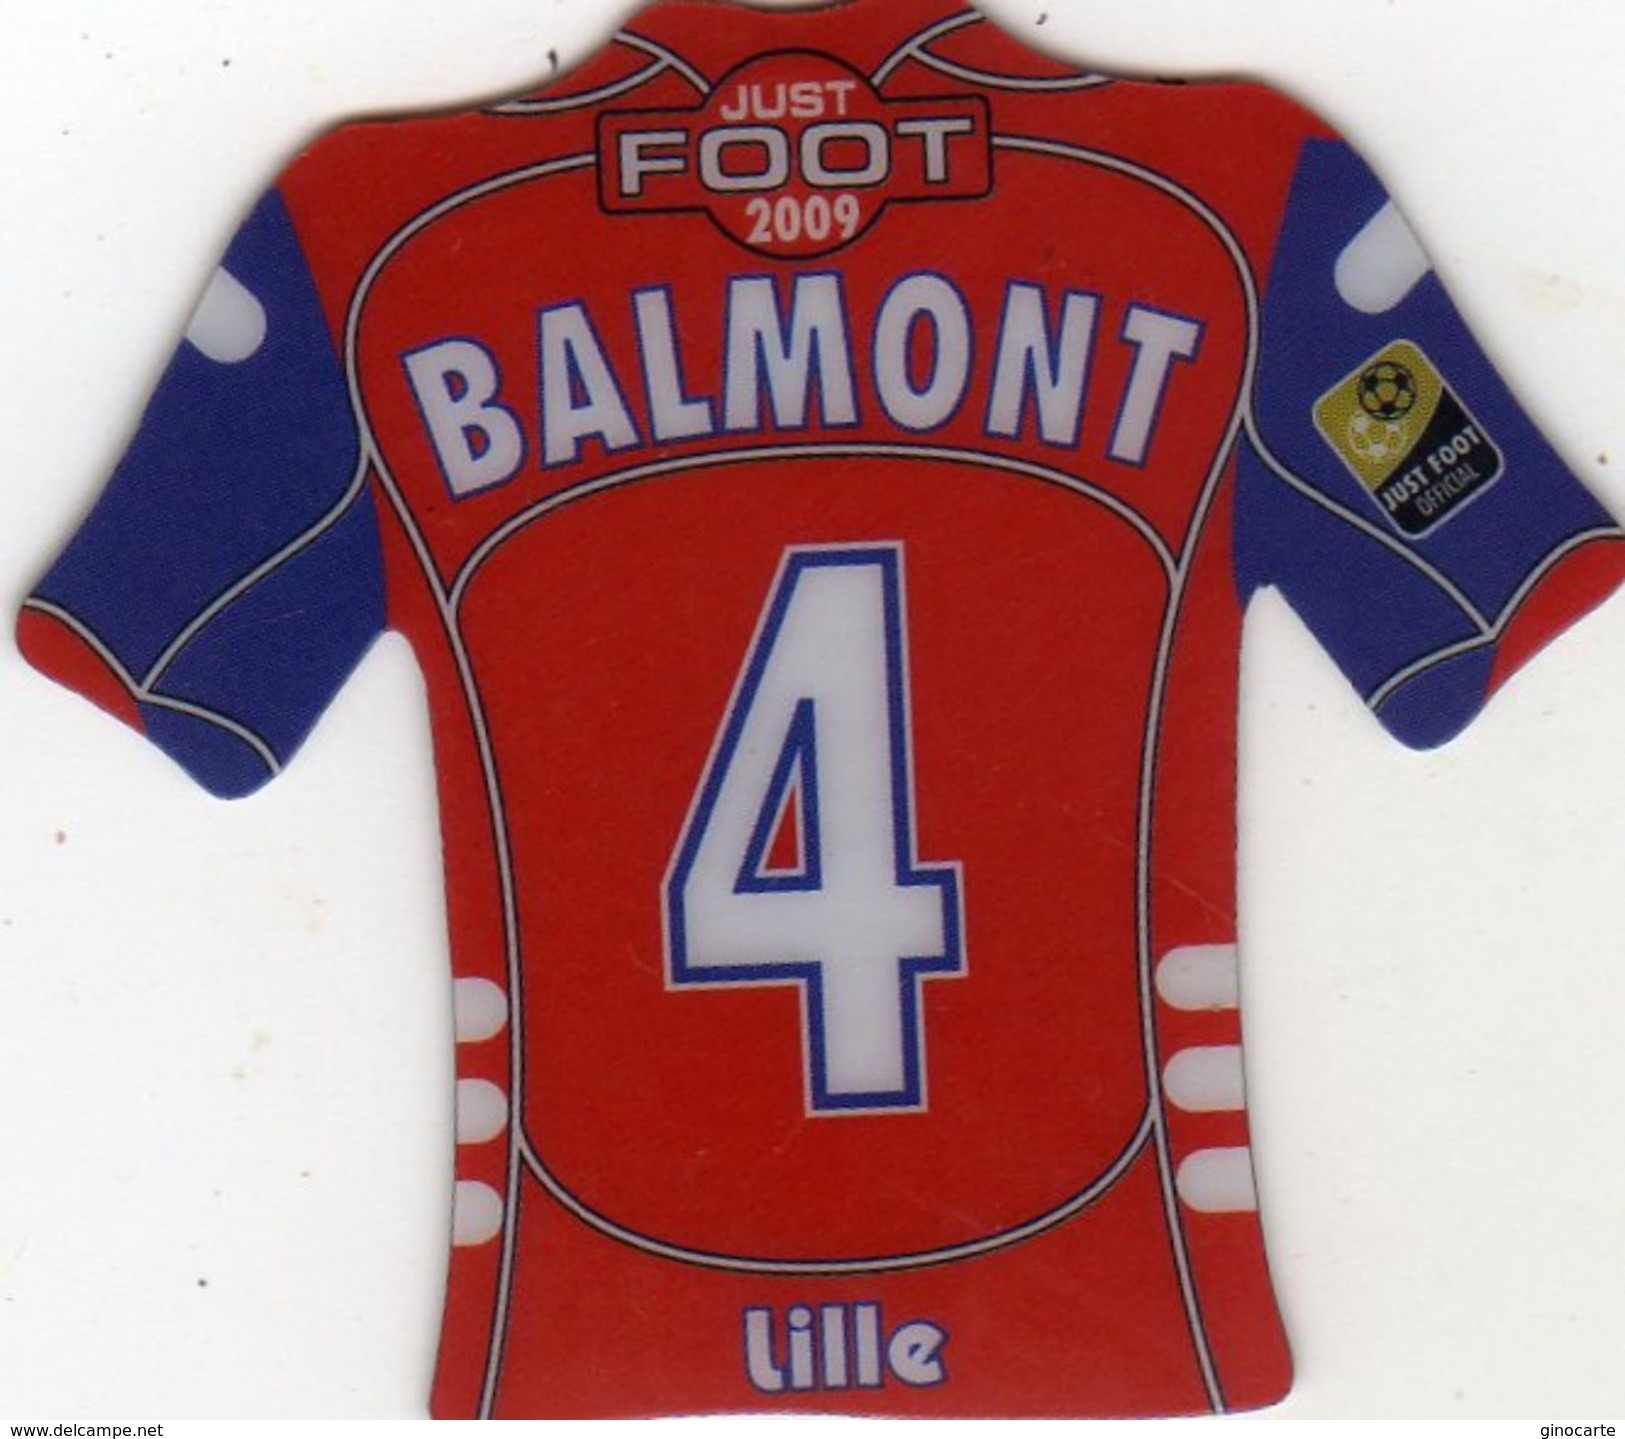 Magnet Magnets Maillot De Football Pitch Auxerre Lille Balmont 2009 - Sports